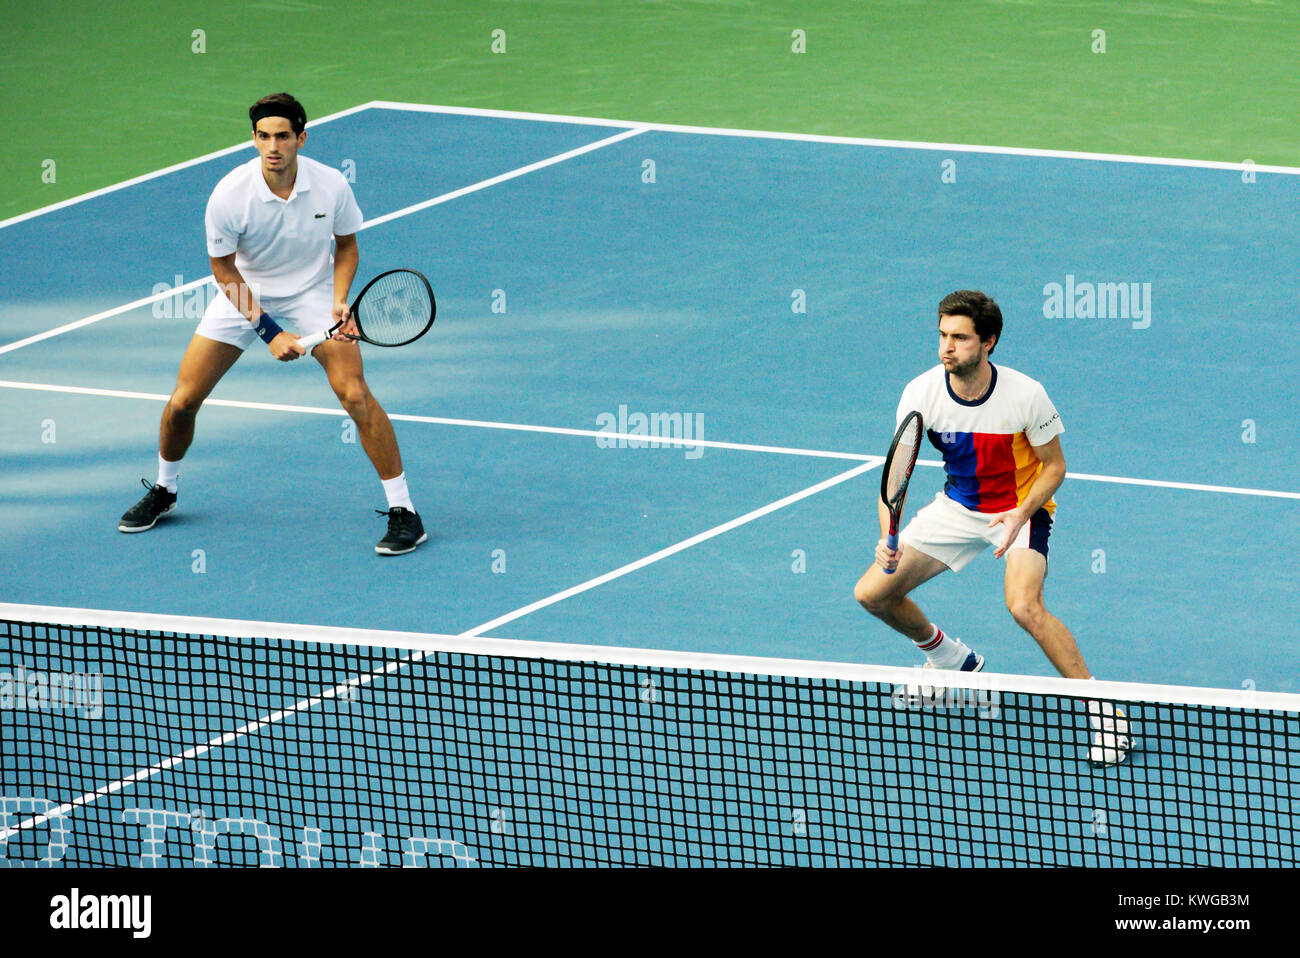 Pune, India. 2nd Jan, 2018. Pierre-Hugues Herbert and Gilles Simon of France in action in the first round of Doubles competition at Tata Open Maharashtra at the Mahalunge Balewadi Tennis Stadium in Pune, India. Credit: Karunesh Johri/Alamy Live News Stock Photo